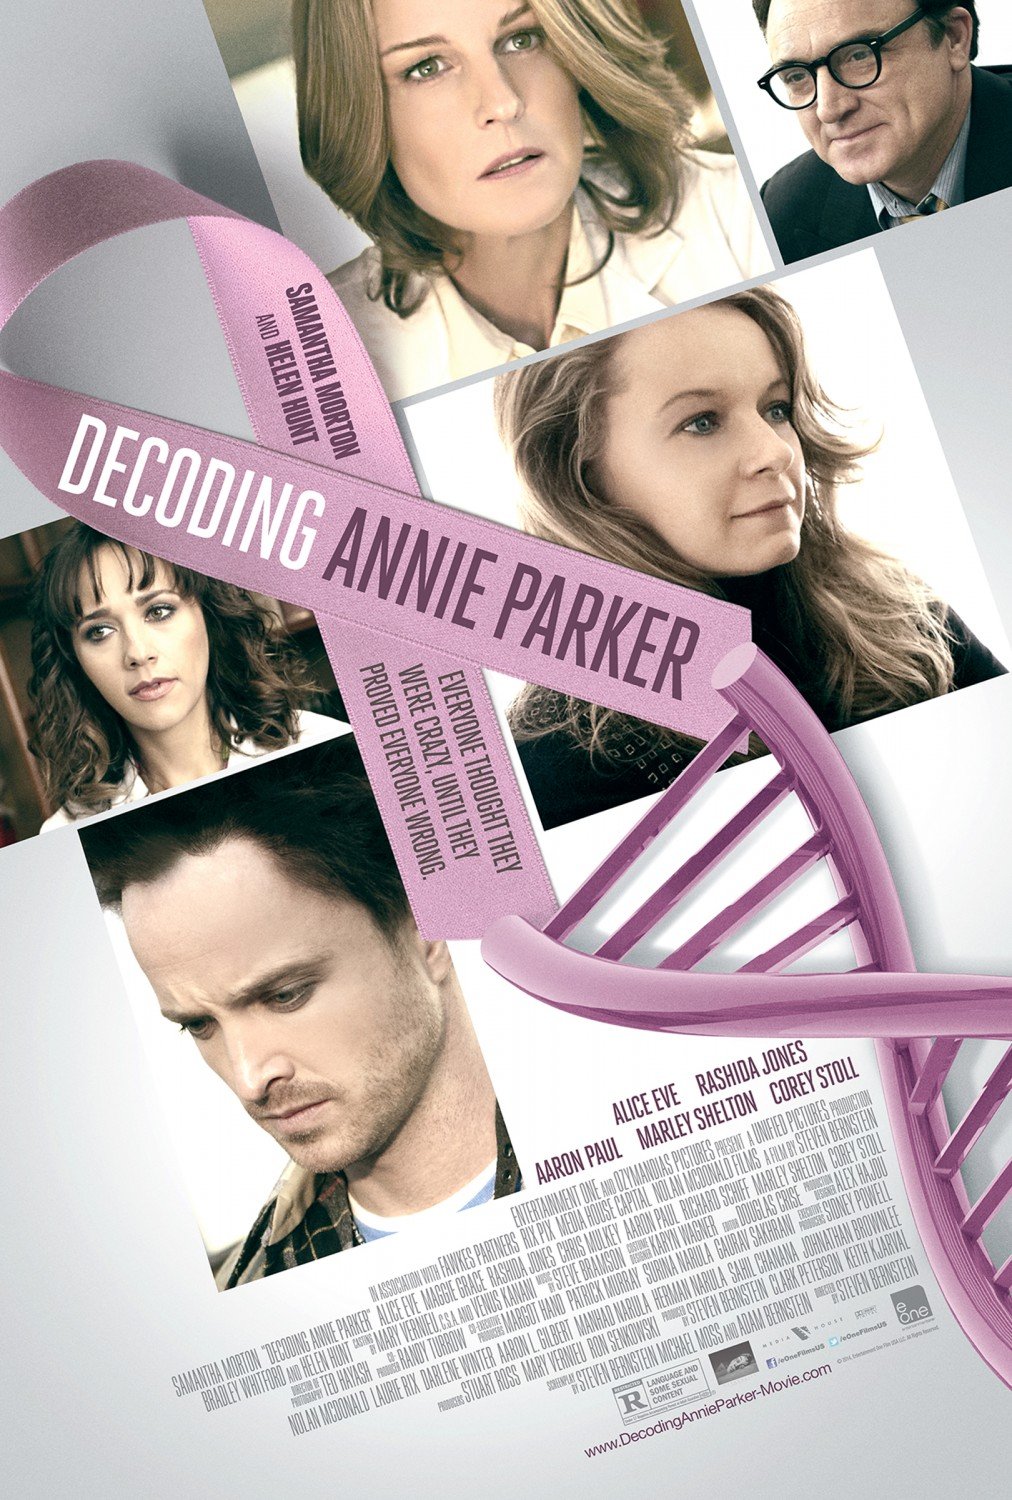 Poster of the movie Decoding Annie Parker